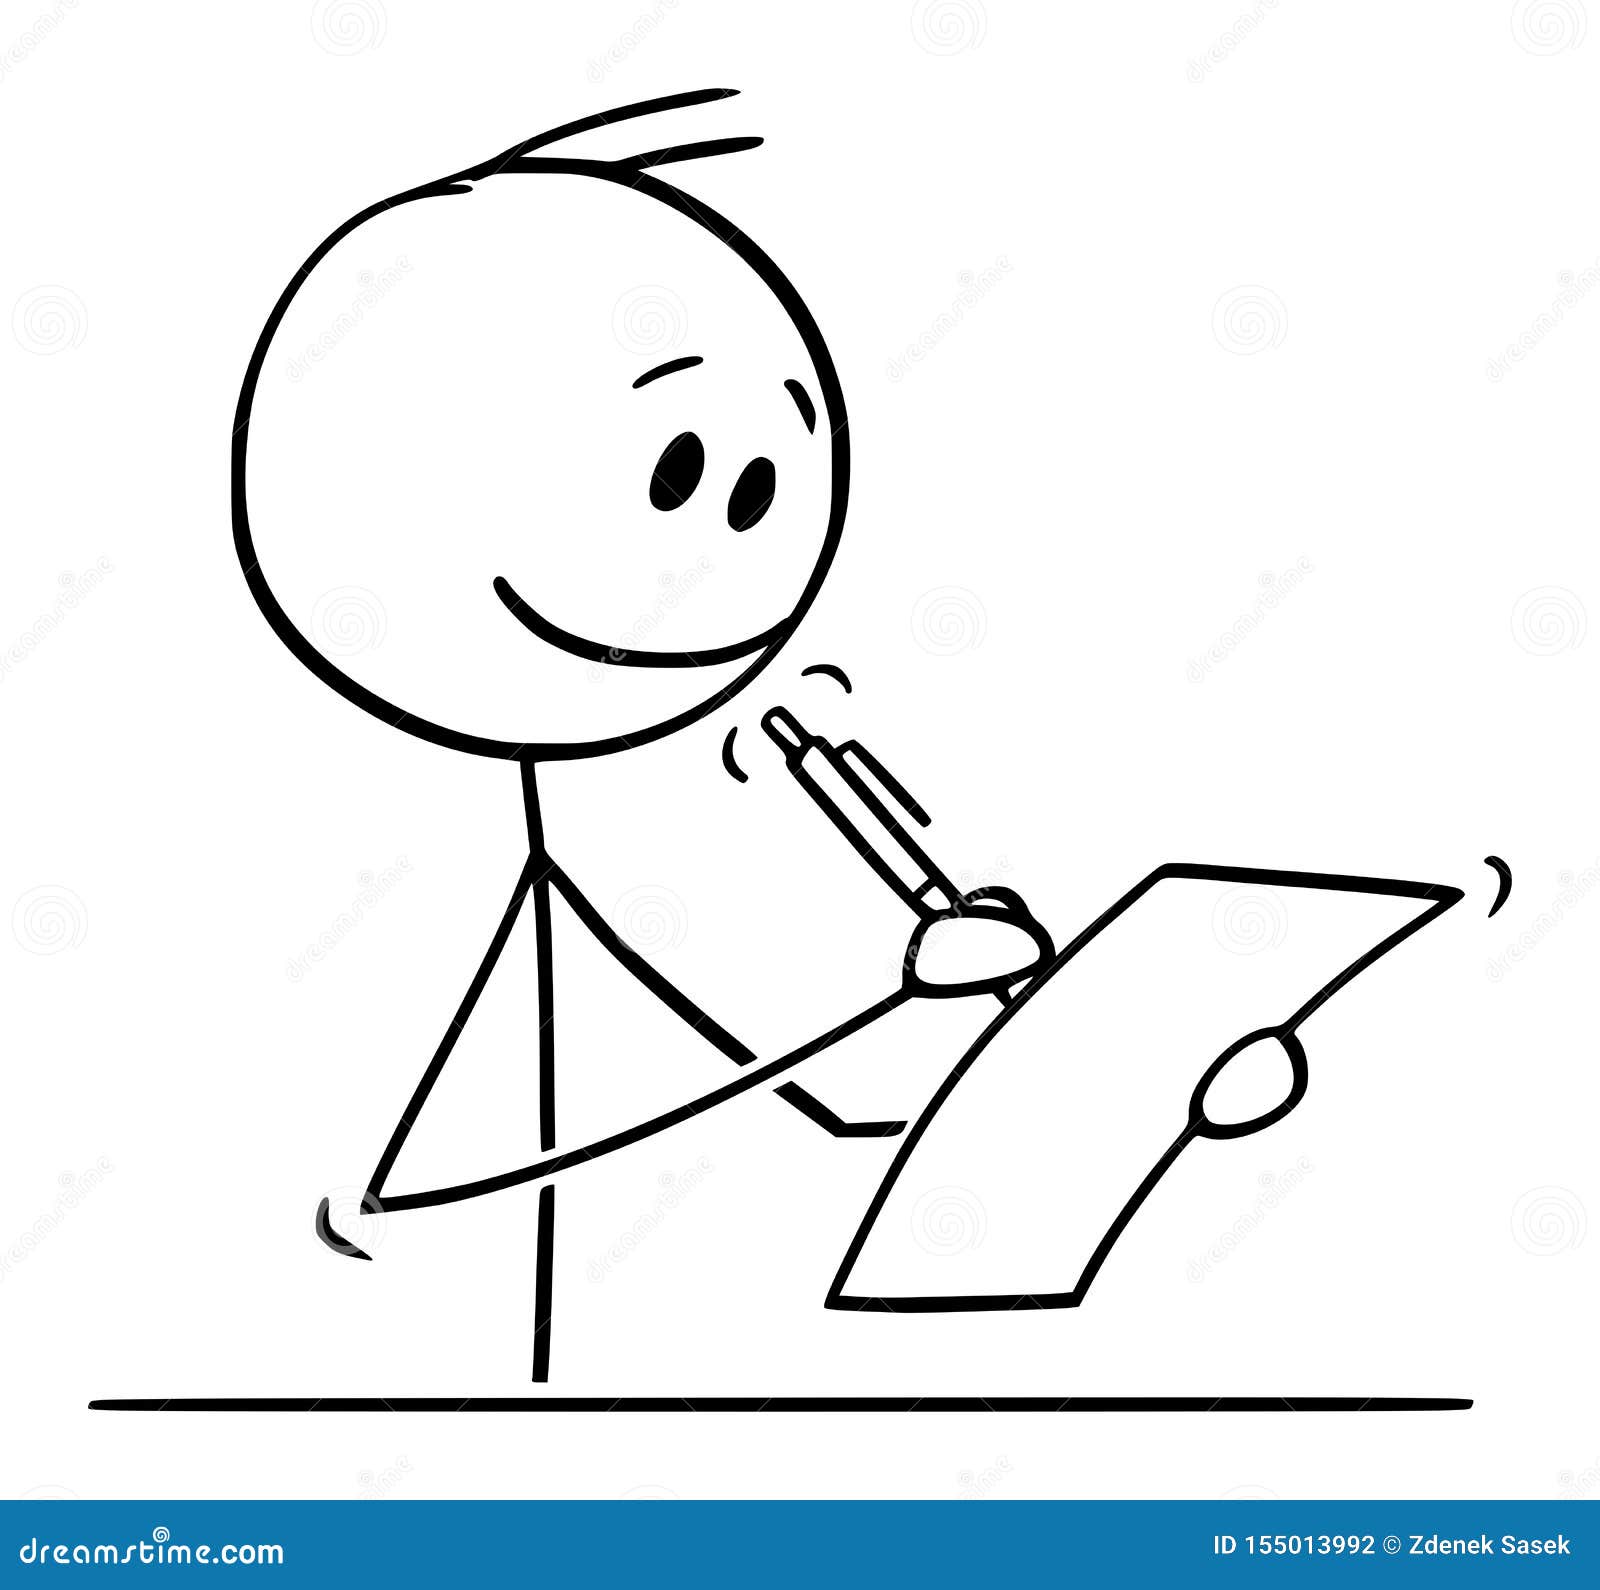  cartoon of smiling man or businessman writing on sheet of paper with ballpoint pen